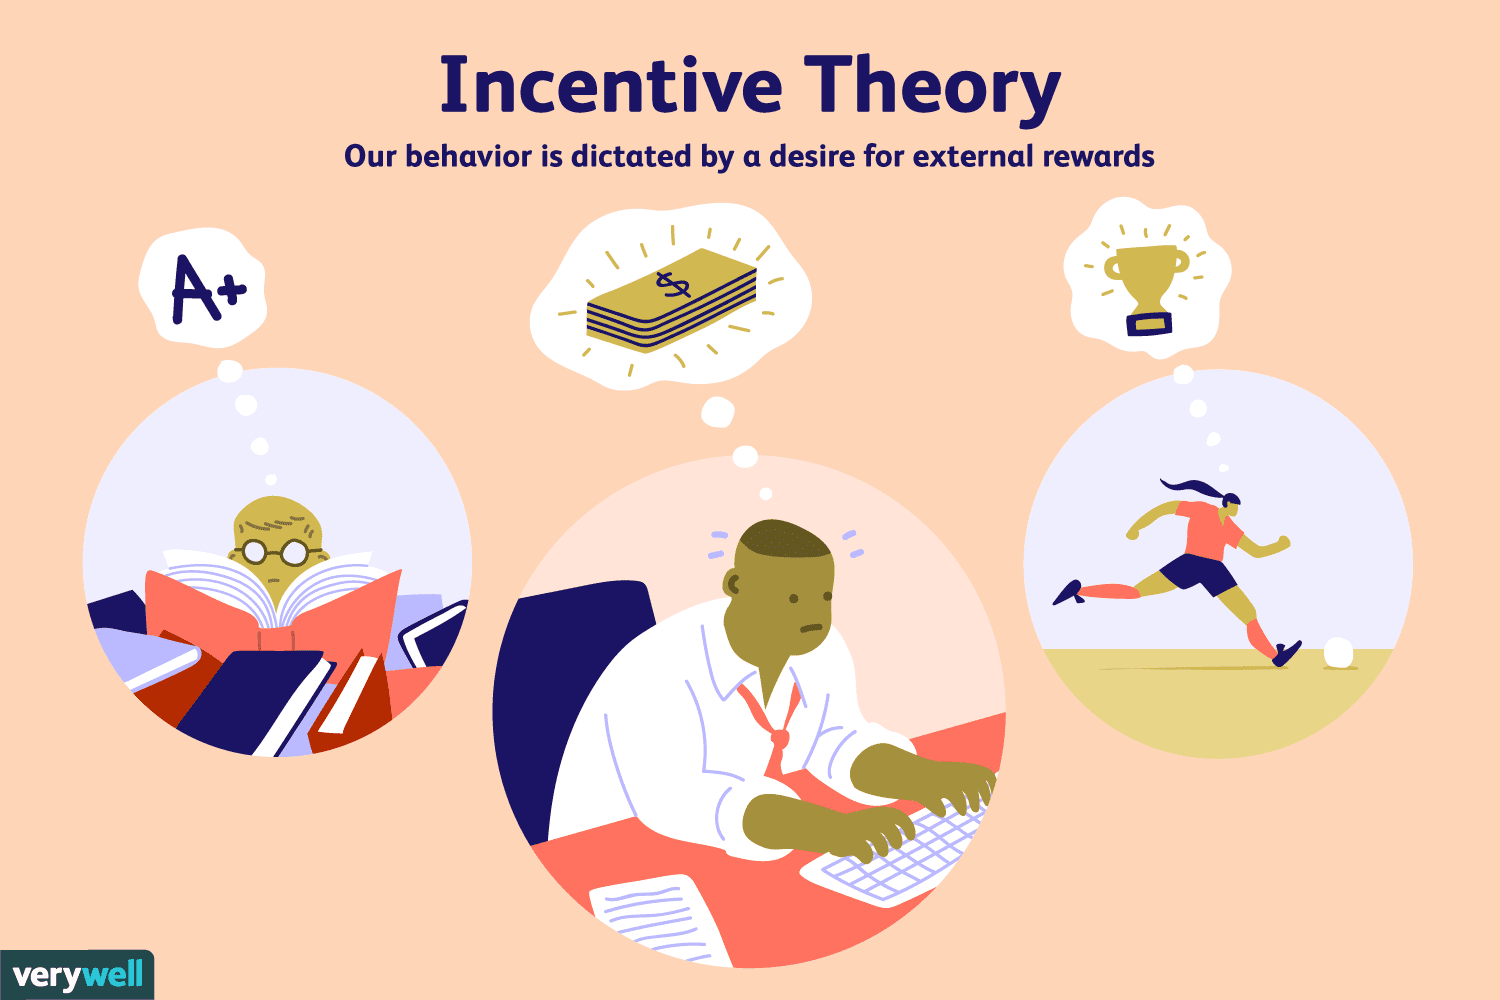 An infographic that details the incentive theory which is that 'our behaviour is dictated by a desire for external rewards.'